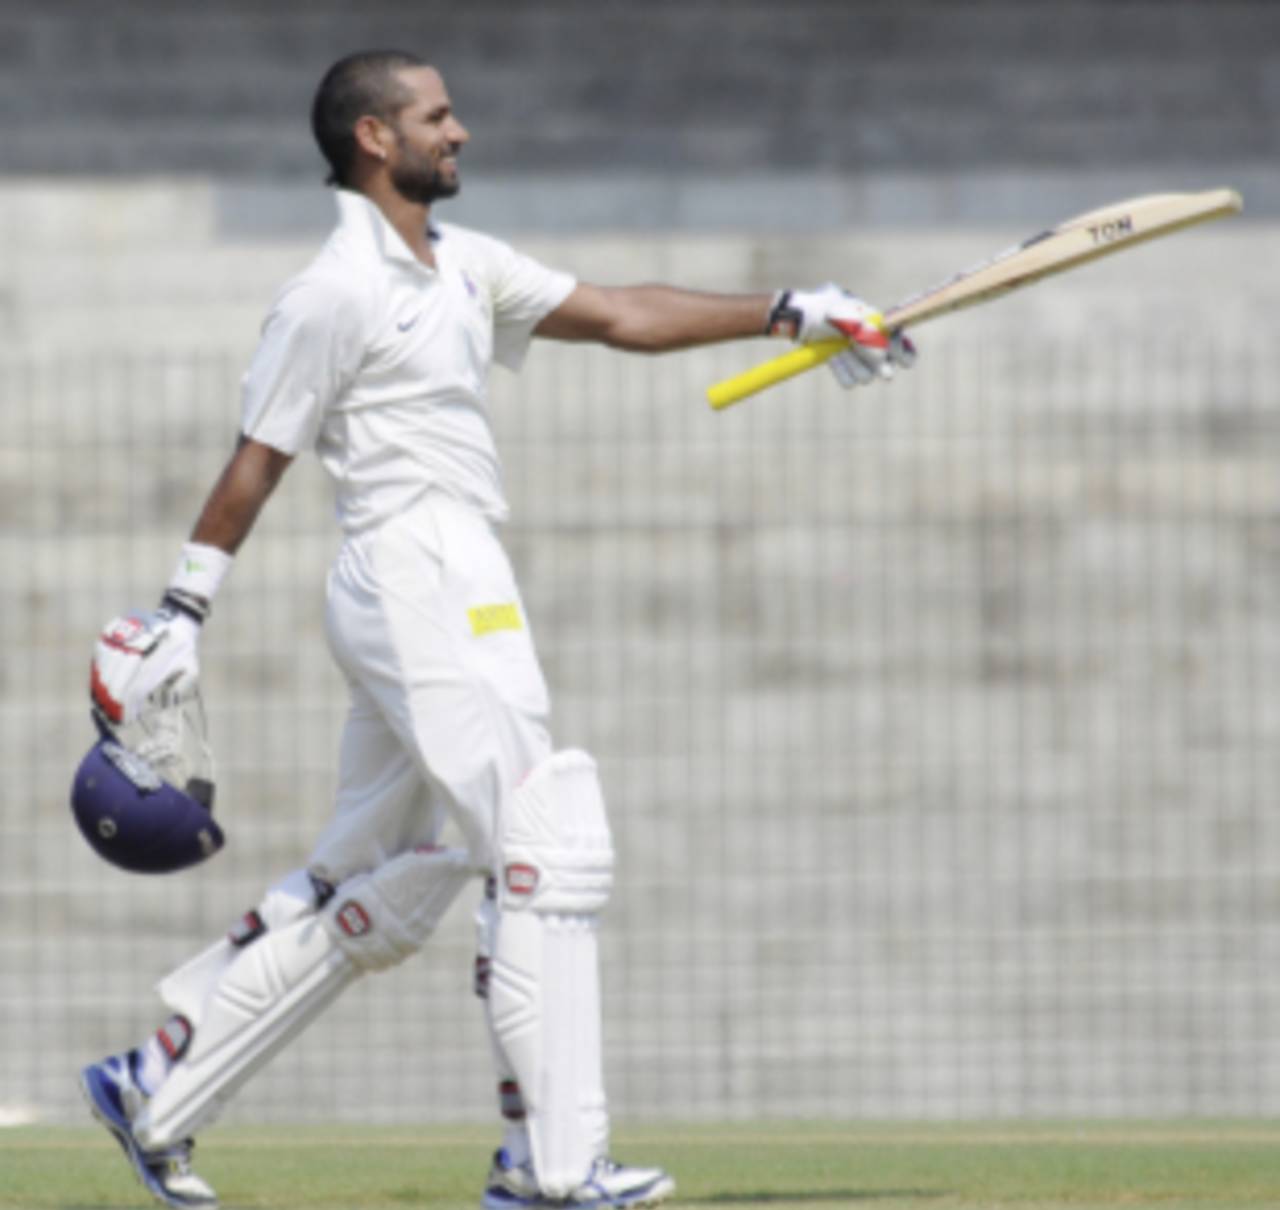 Shikhar Dhawan celebrates a century on the first day, North Zone v West Zone, Duleep Trophy, 1st day, Chennai, October 6, 2012